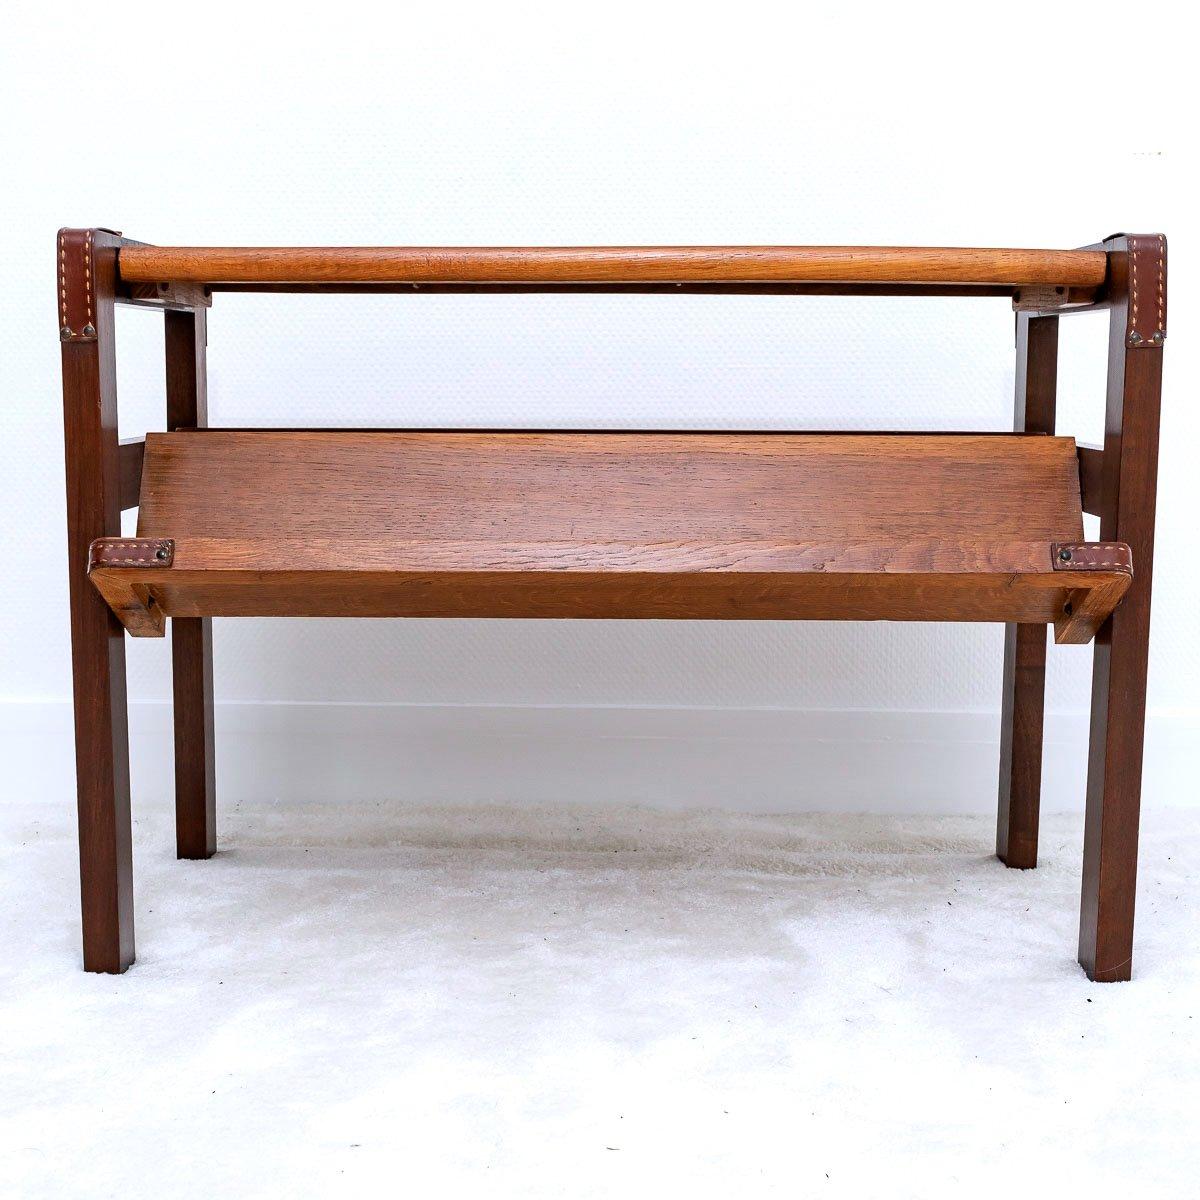 Coffee table forming magazine rack of Jacques Adnet.
The structure in elm decorated with leather.

He directed the Compagnie des Arts Français from 1928 to 1960. His furniture with a refined design, incorporating mirrors, parchment, leather and